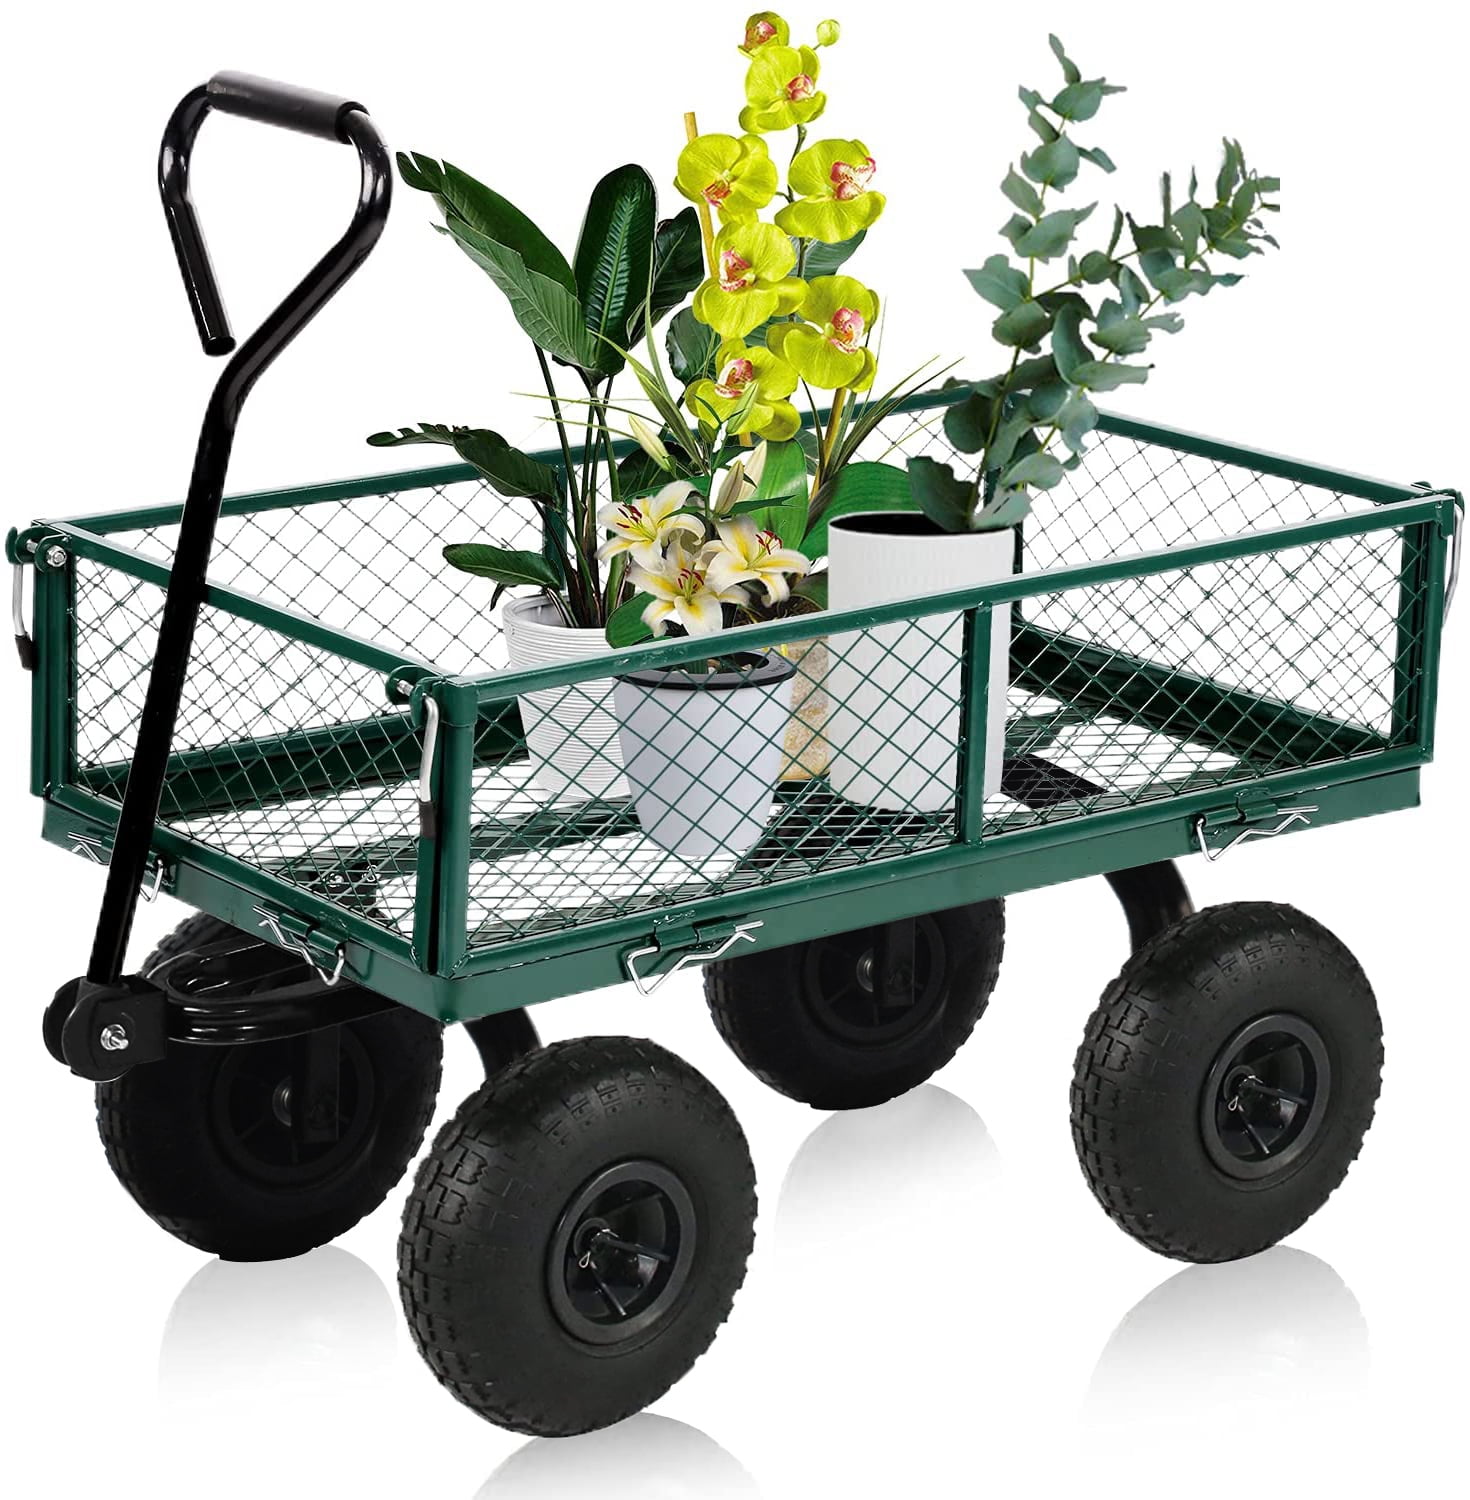 Steel Outdoor Lawn Garden Pull Wagon Cart Trailer Removable Sides Cap 400-Lb 